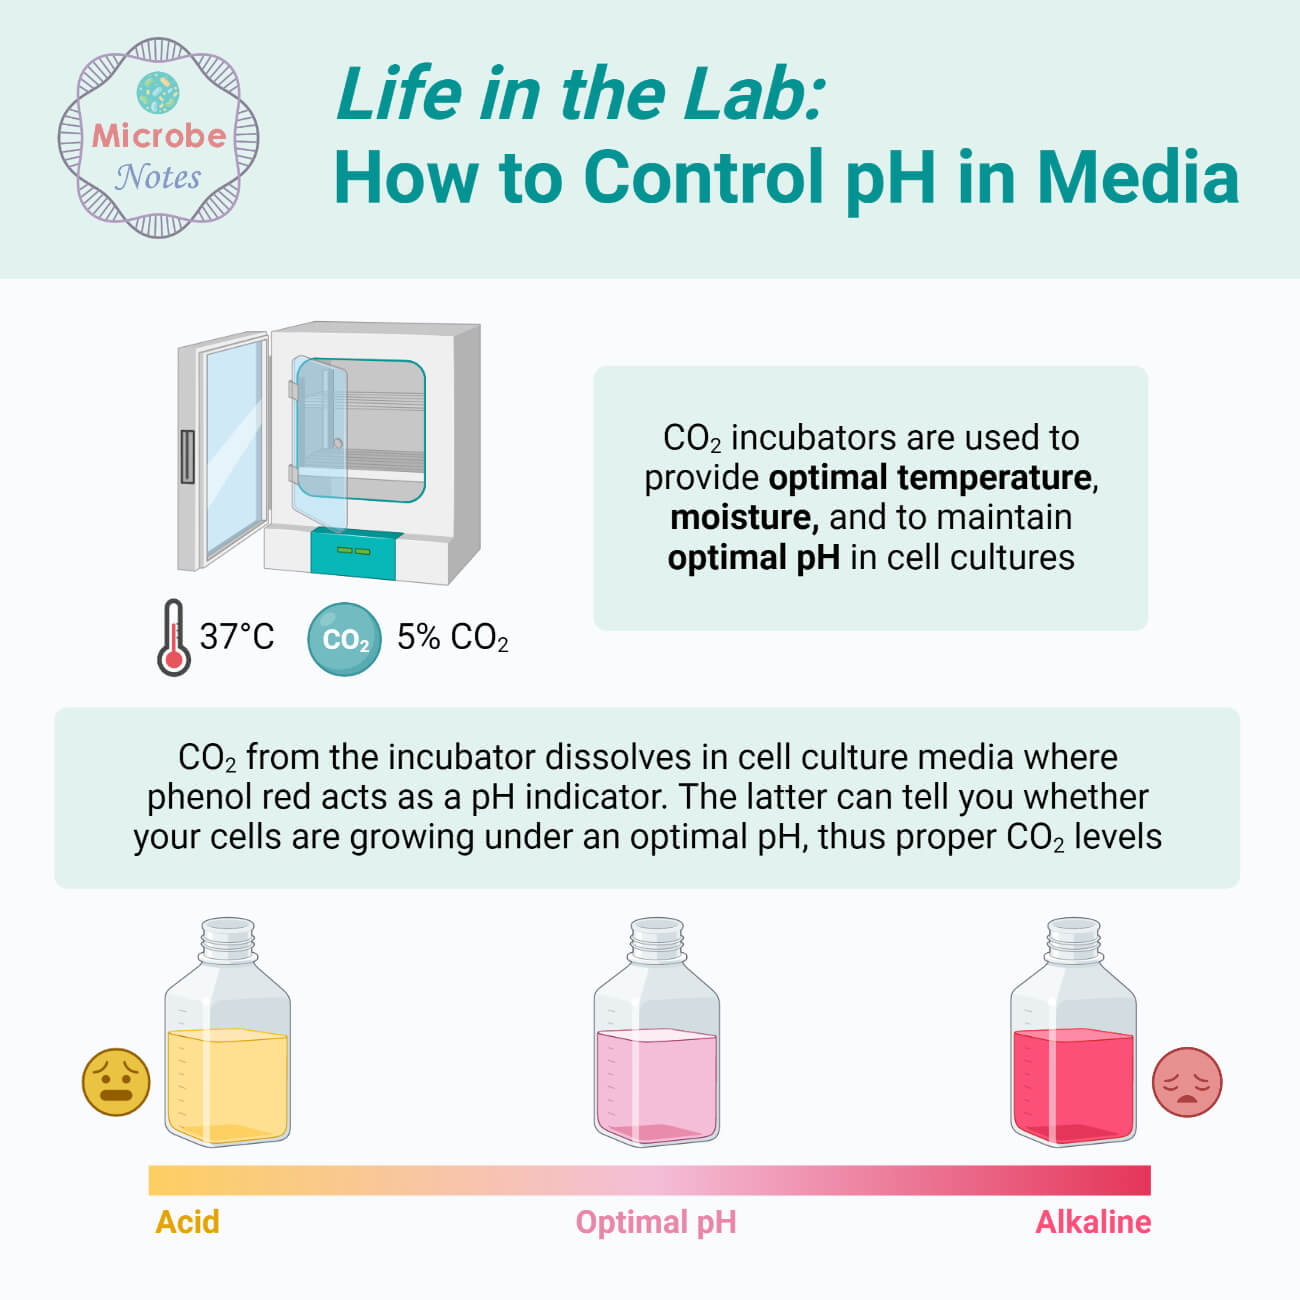 How to Control pH in Media